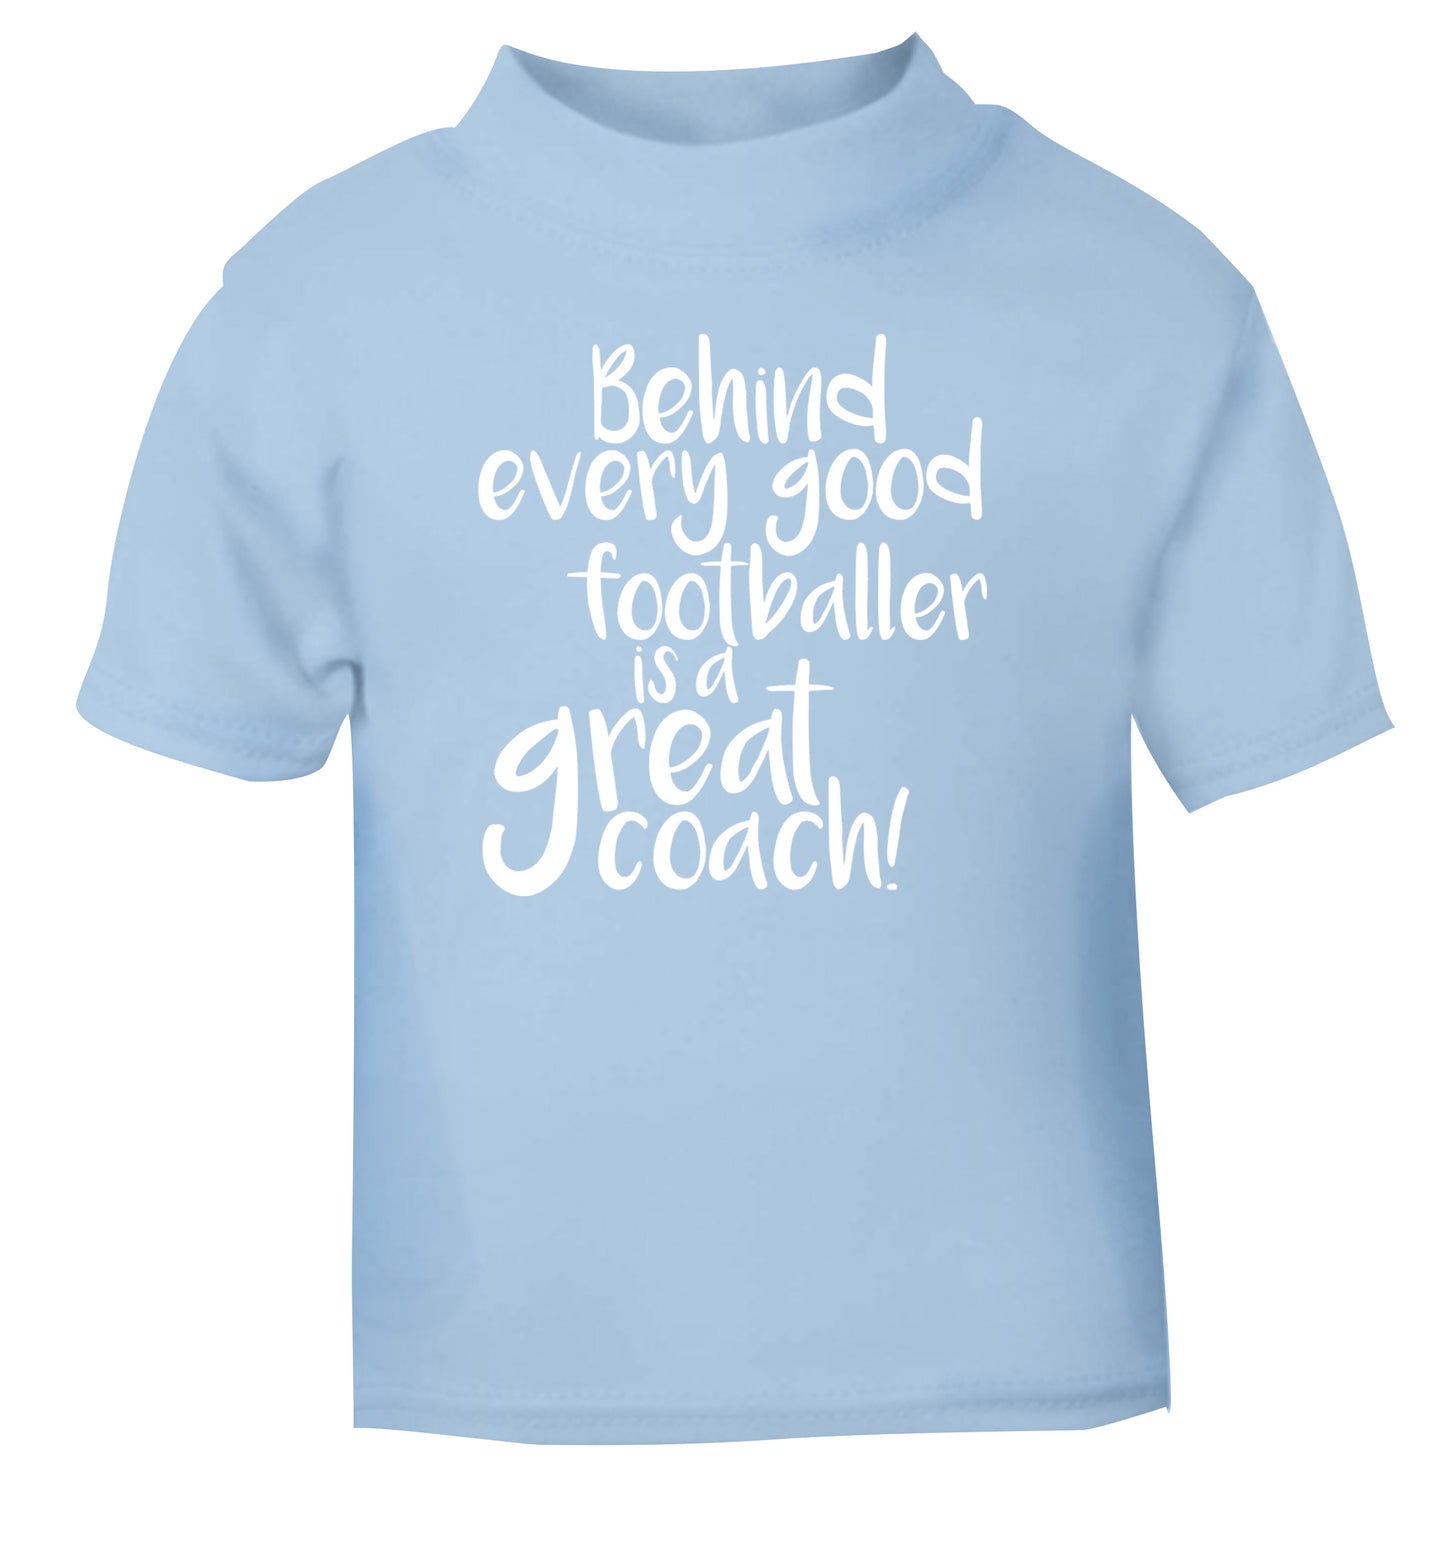 Behind every good footballer is a great coach! light blue Baby Toddler Tshirt 2 Years